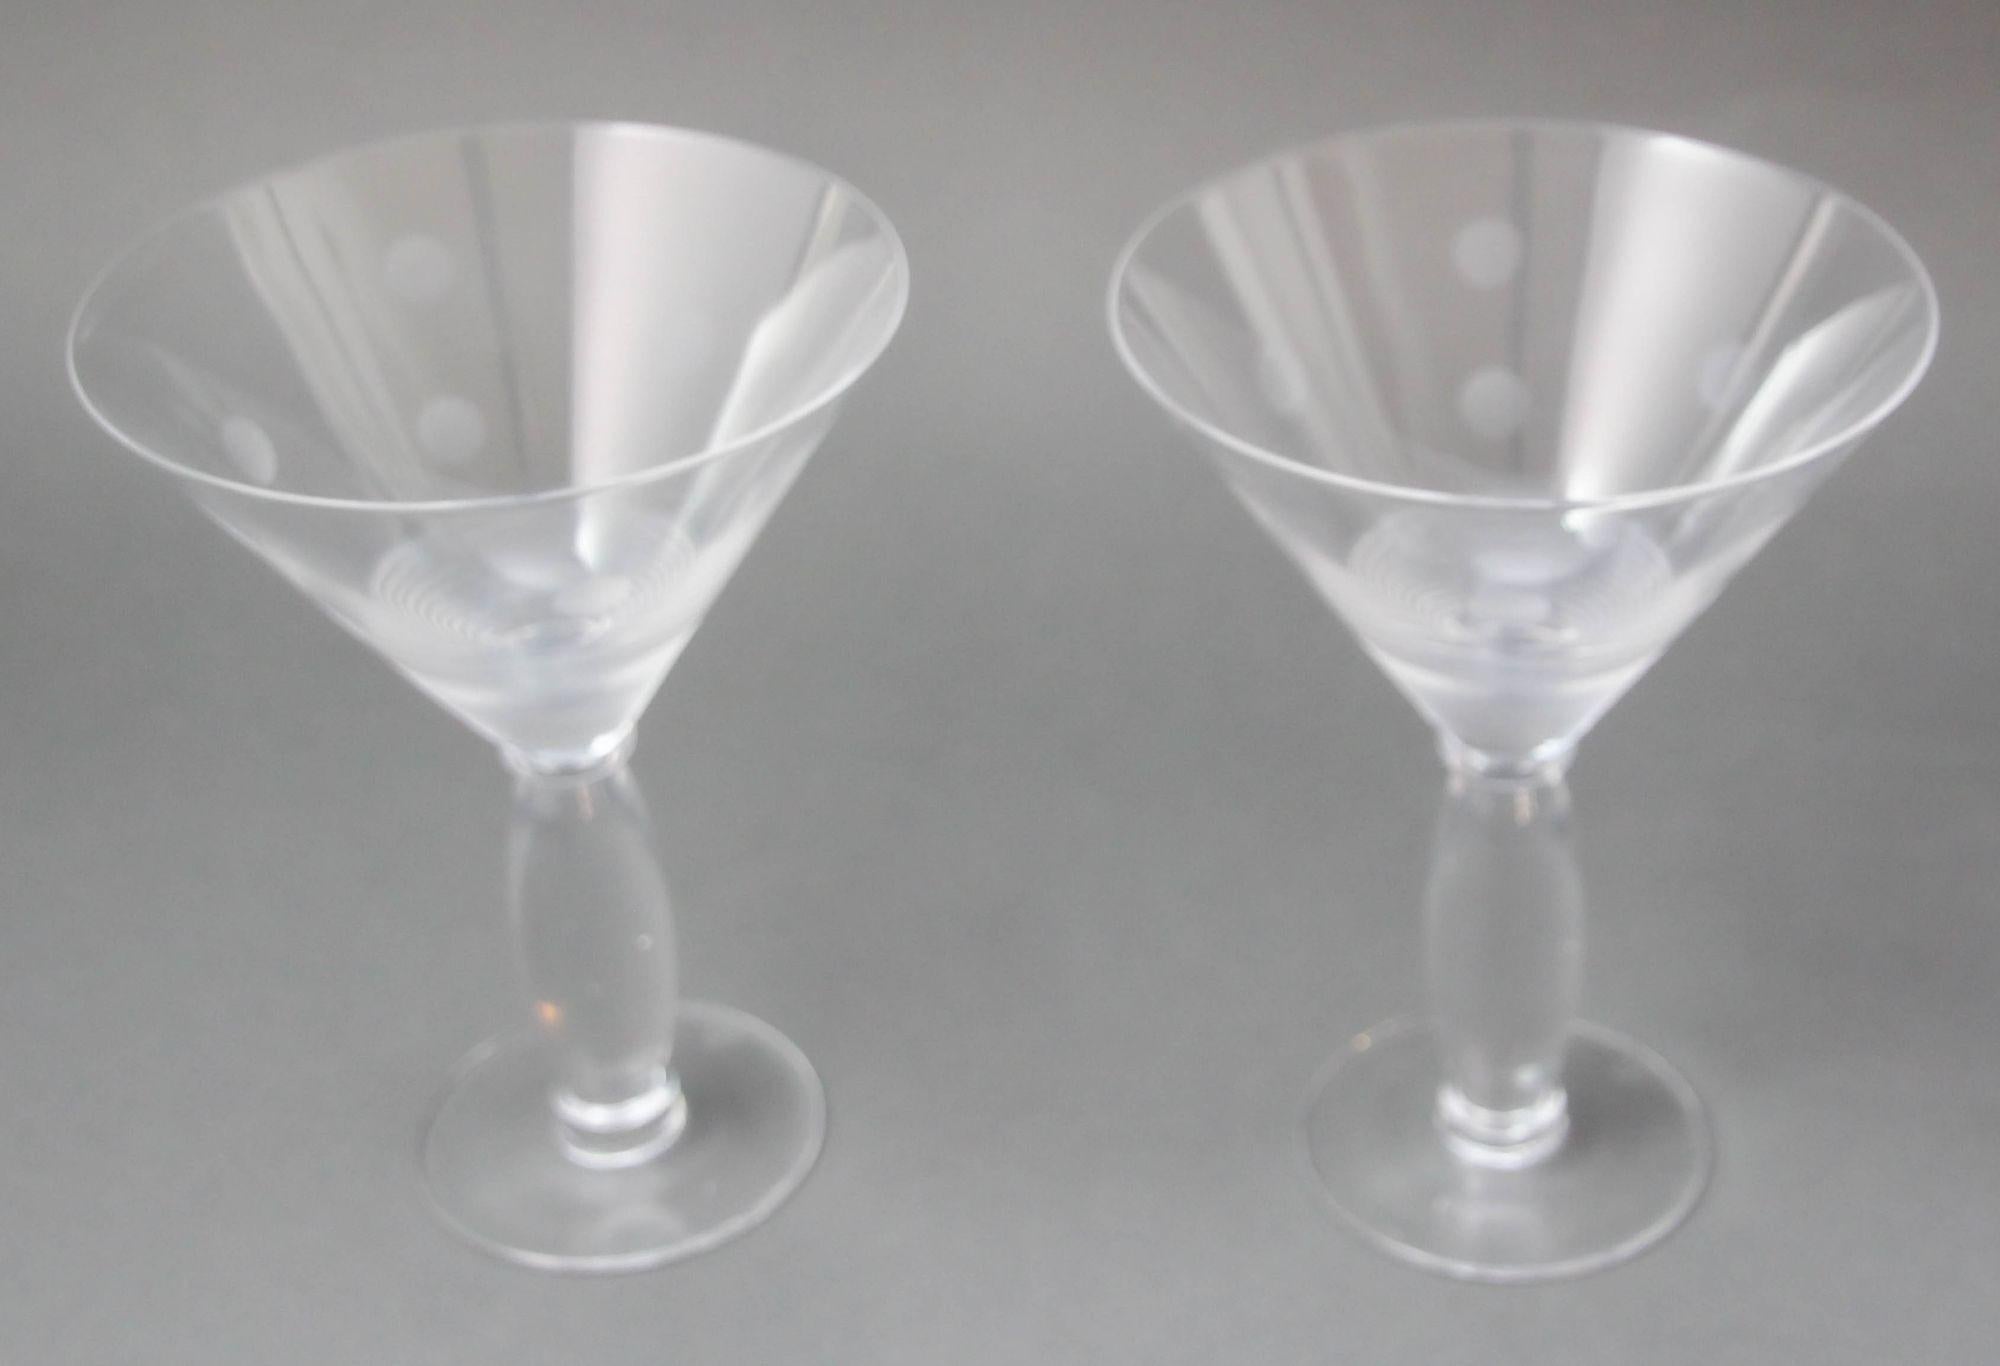 Vintage ROYAL DOULTON Martini Crystal clear Etched Glasses Set of 2.Royal Doulton precious crystal barware cocktail glasses with a unique handmade etched bubble polka dots pattern.Great addition to your home bar collection.Hallmark: They have the